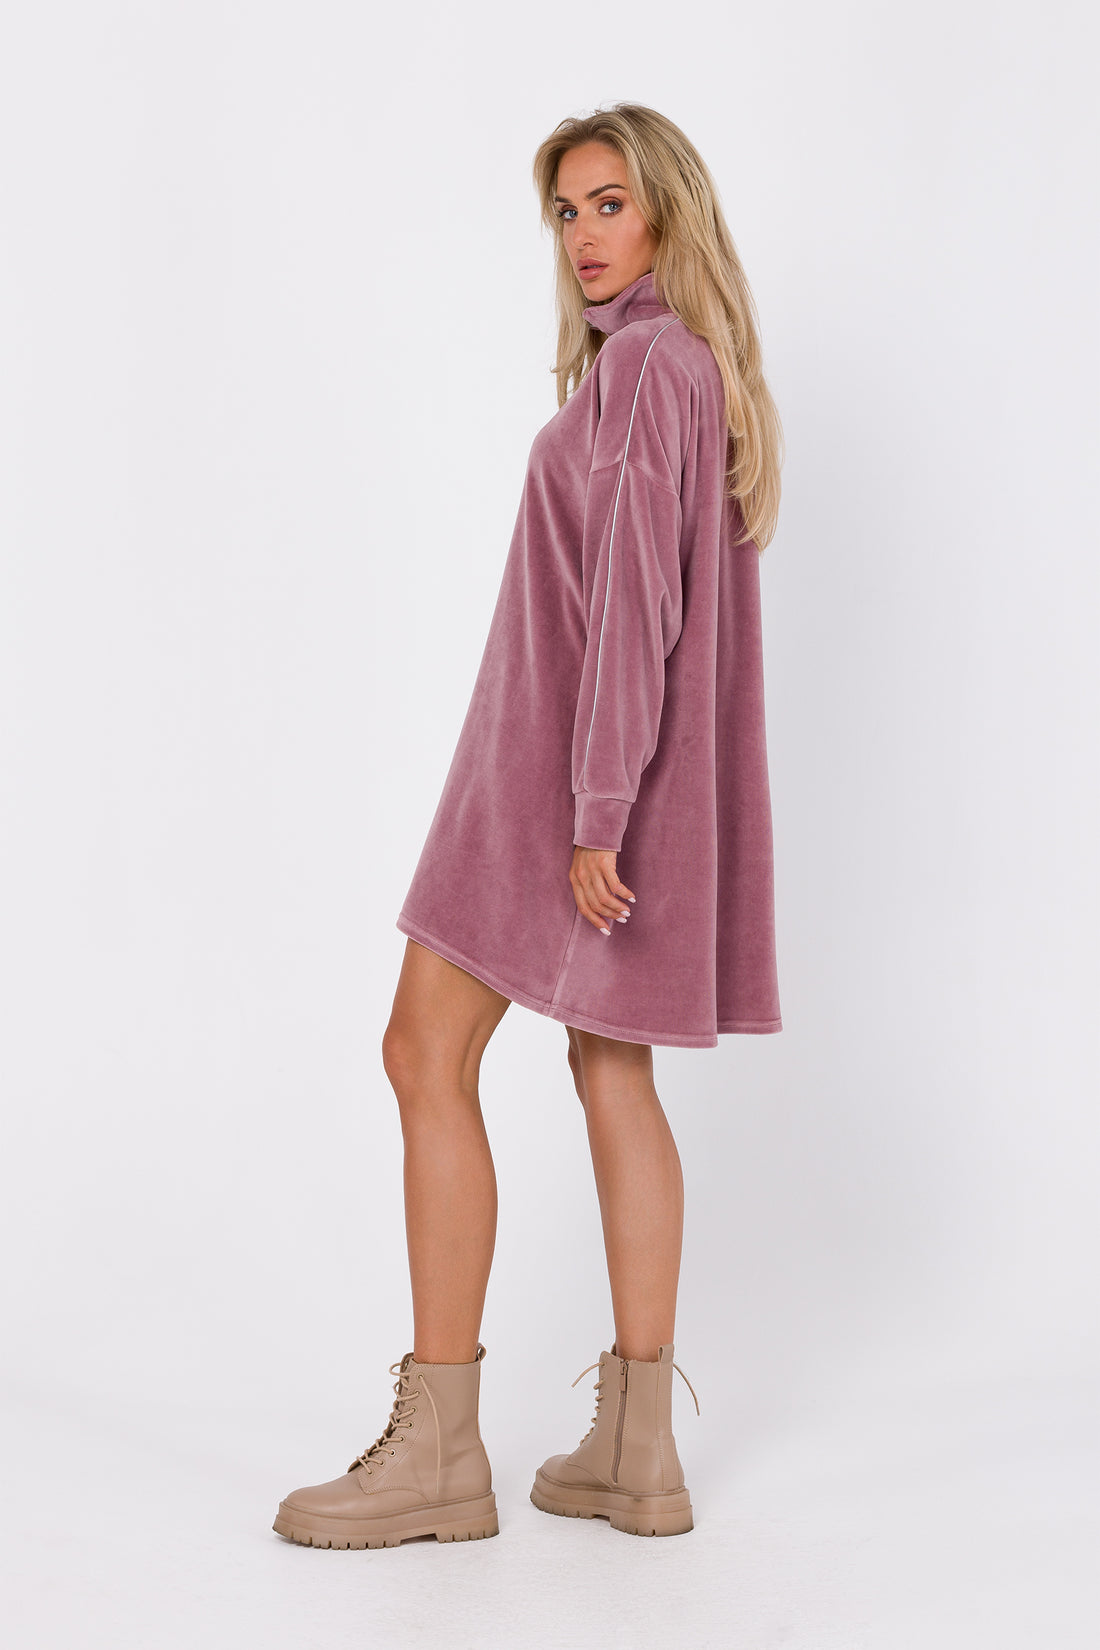 Velvet Edge Dress | Strictly In | Indulge in the allure of our Velvet Edge Dress – an 80% velvet-knit cotton with a zipped high collar, decorative piping, and a high-low hem, this dress is a modern statement in comfort and chic design.